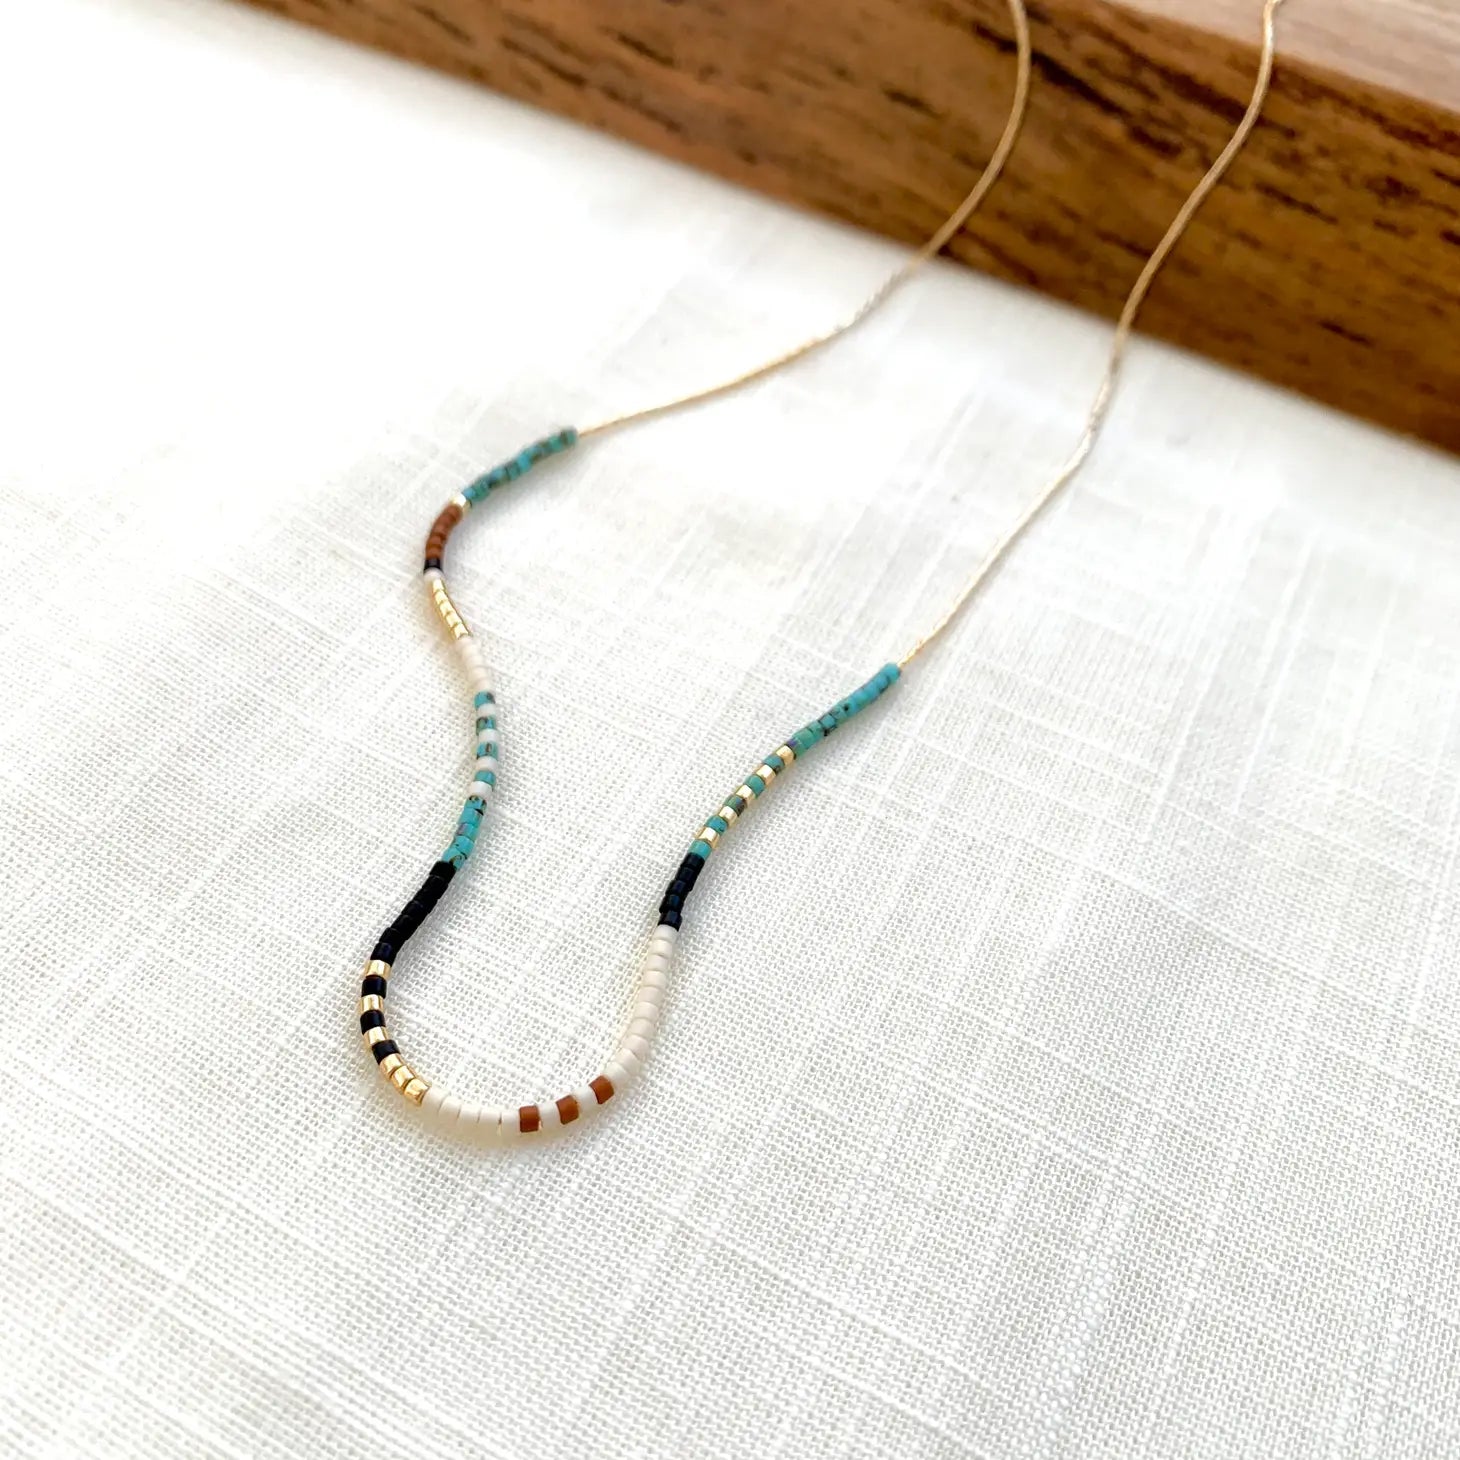 Desert Turquoise Seed Bead Necklace